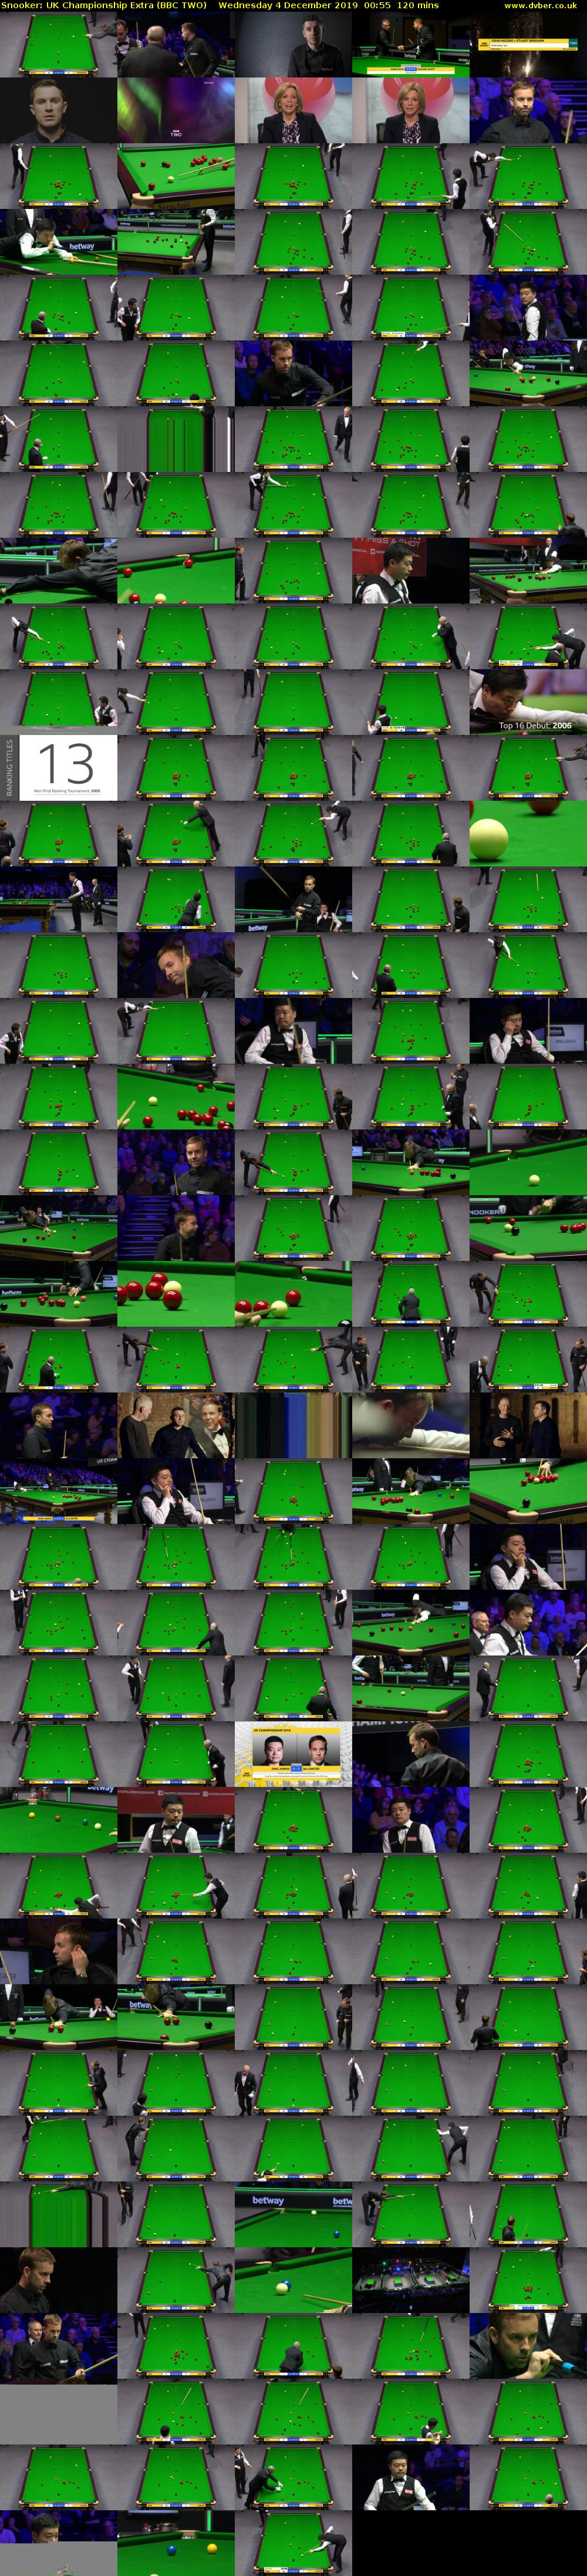 Snooker: UK Championship Extra (BBC TWO) Wednesday 4 December 2019 00:55 - 02:55